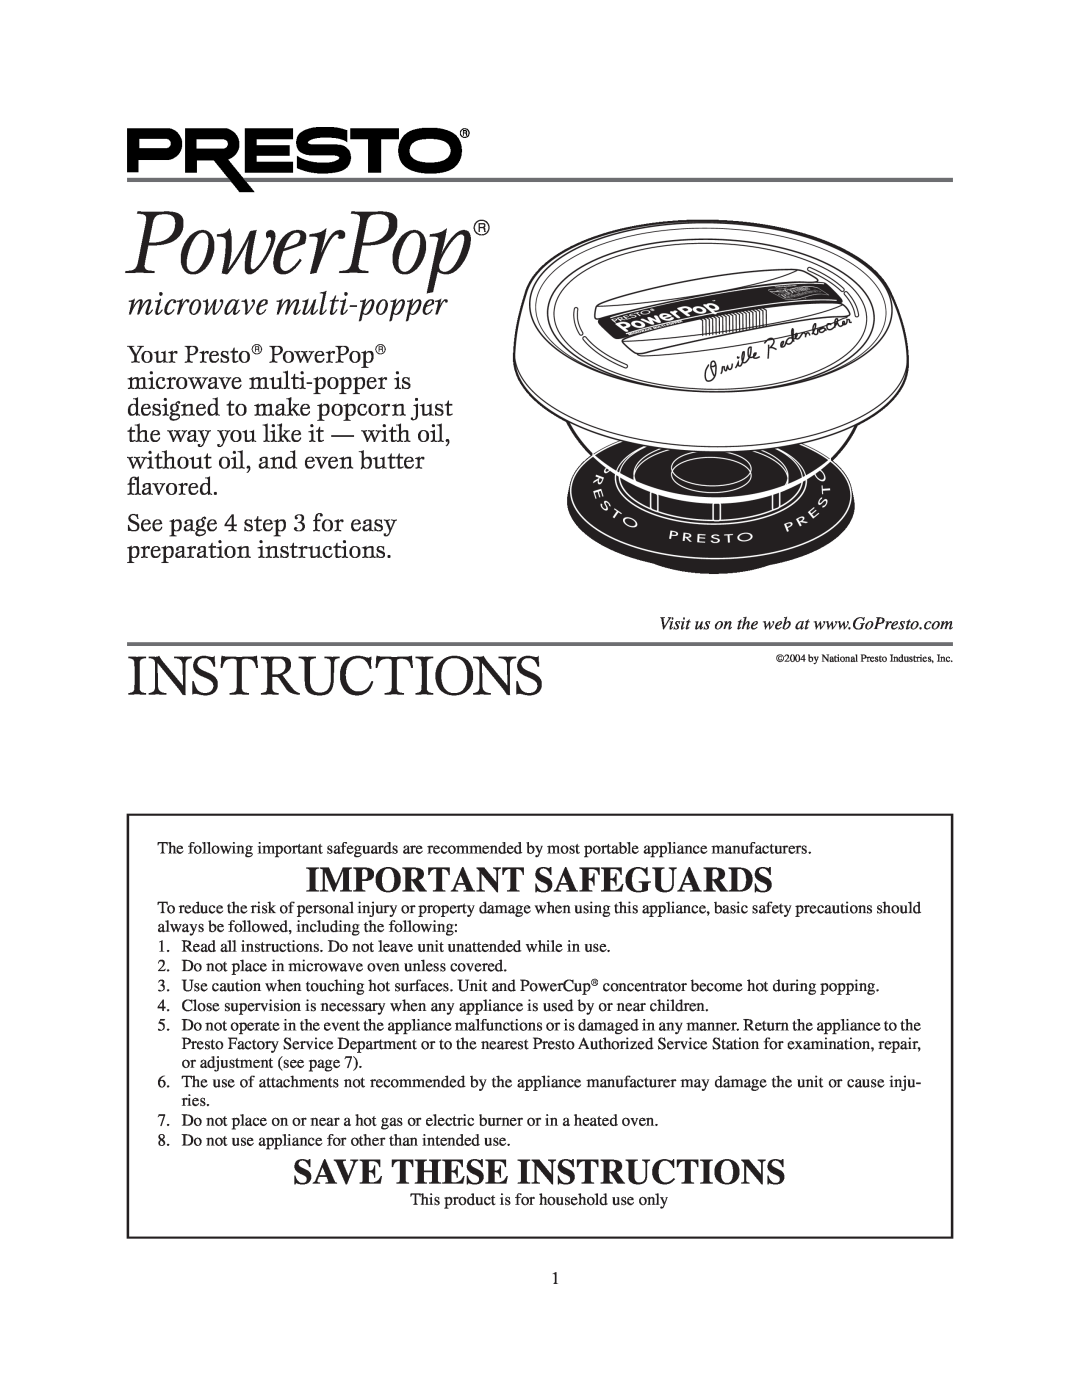 Presto manual microwave multi-popper, PowerPop→, Important Safeguards, Save These Instructions 